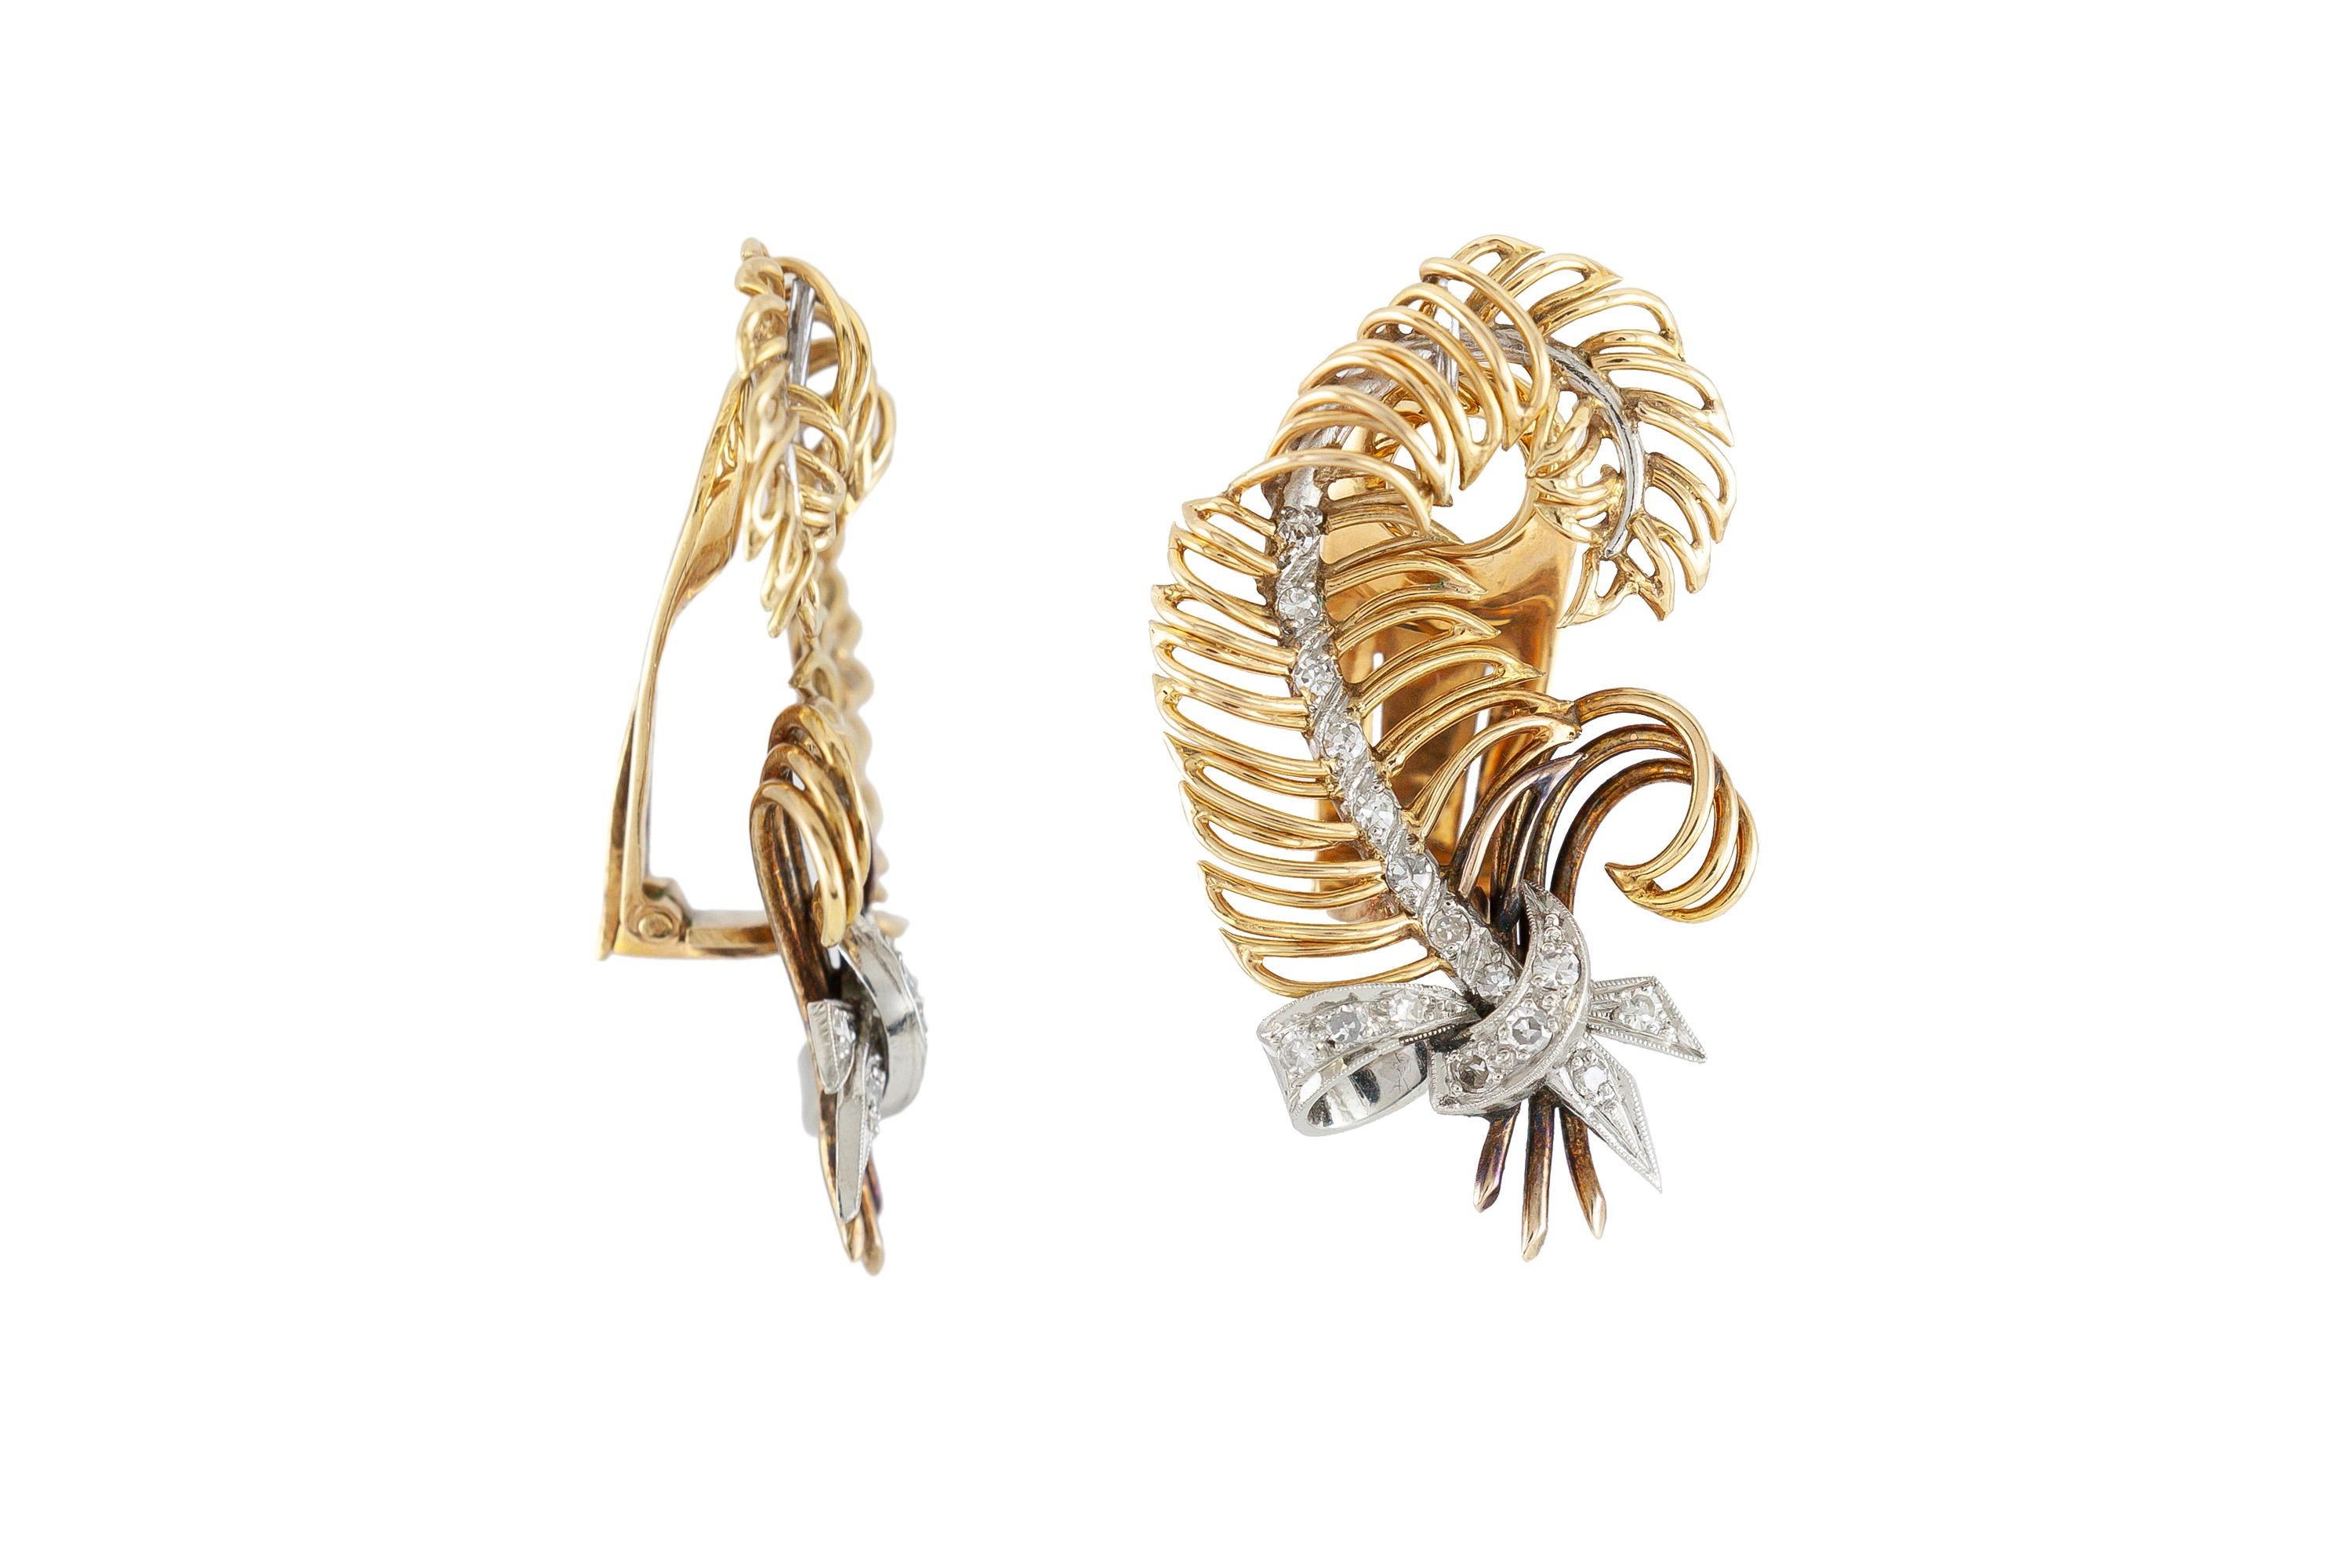 The earrings are finely crafted in 18k yellow gold with diamonds weighing approximately a total of 0.40 carat.

